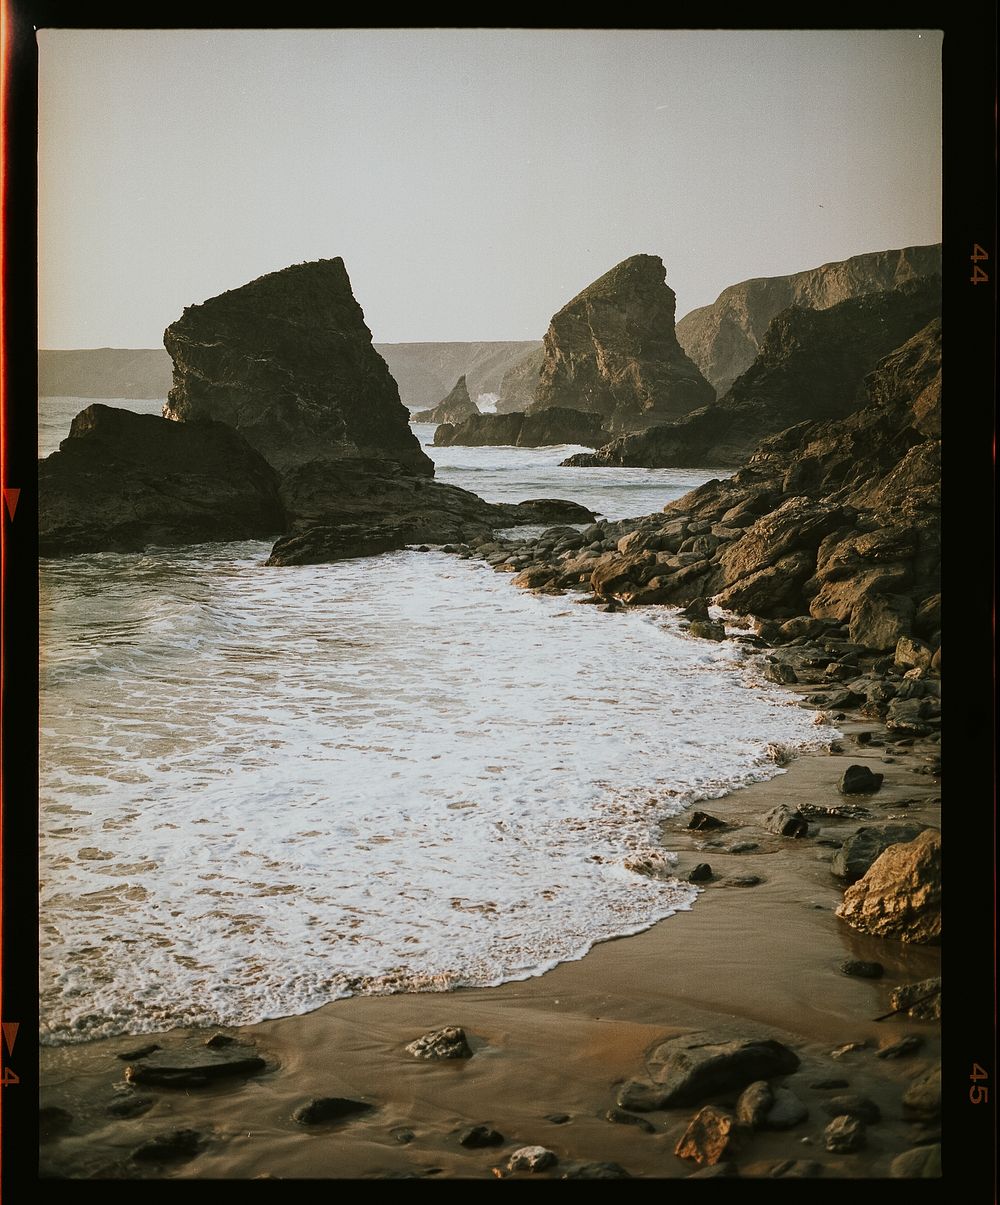 View of beach with film effect